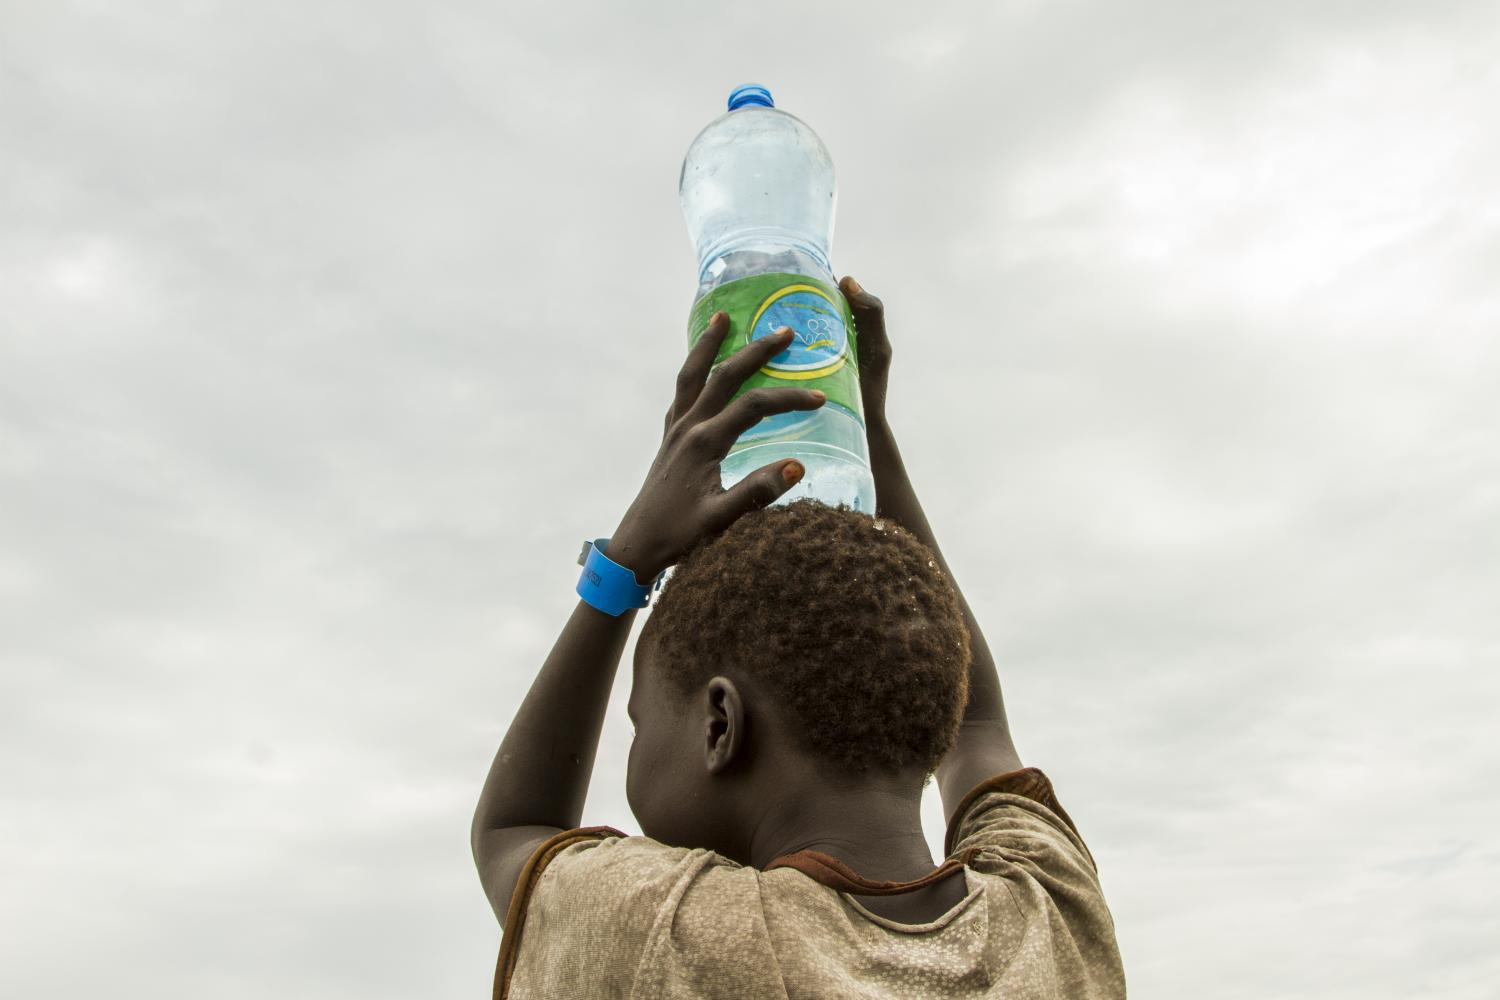 P&G announced in advance of World Water Day it would deliver 25 billion liters of water – more than 100 billion glasses of water – by 2025 through its non-profit Children’s Safe Drinking Water (CSDW) Program. 